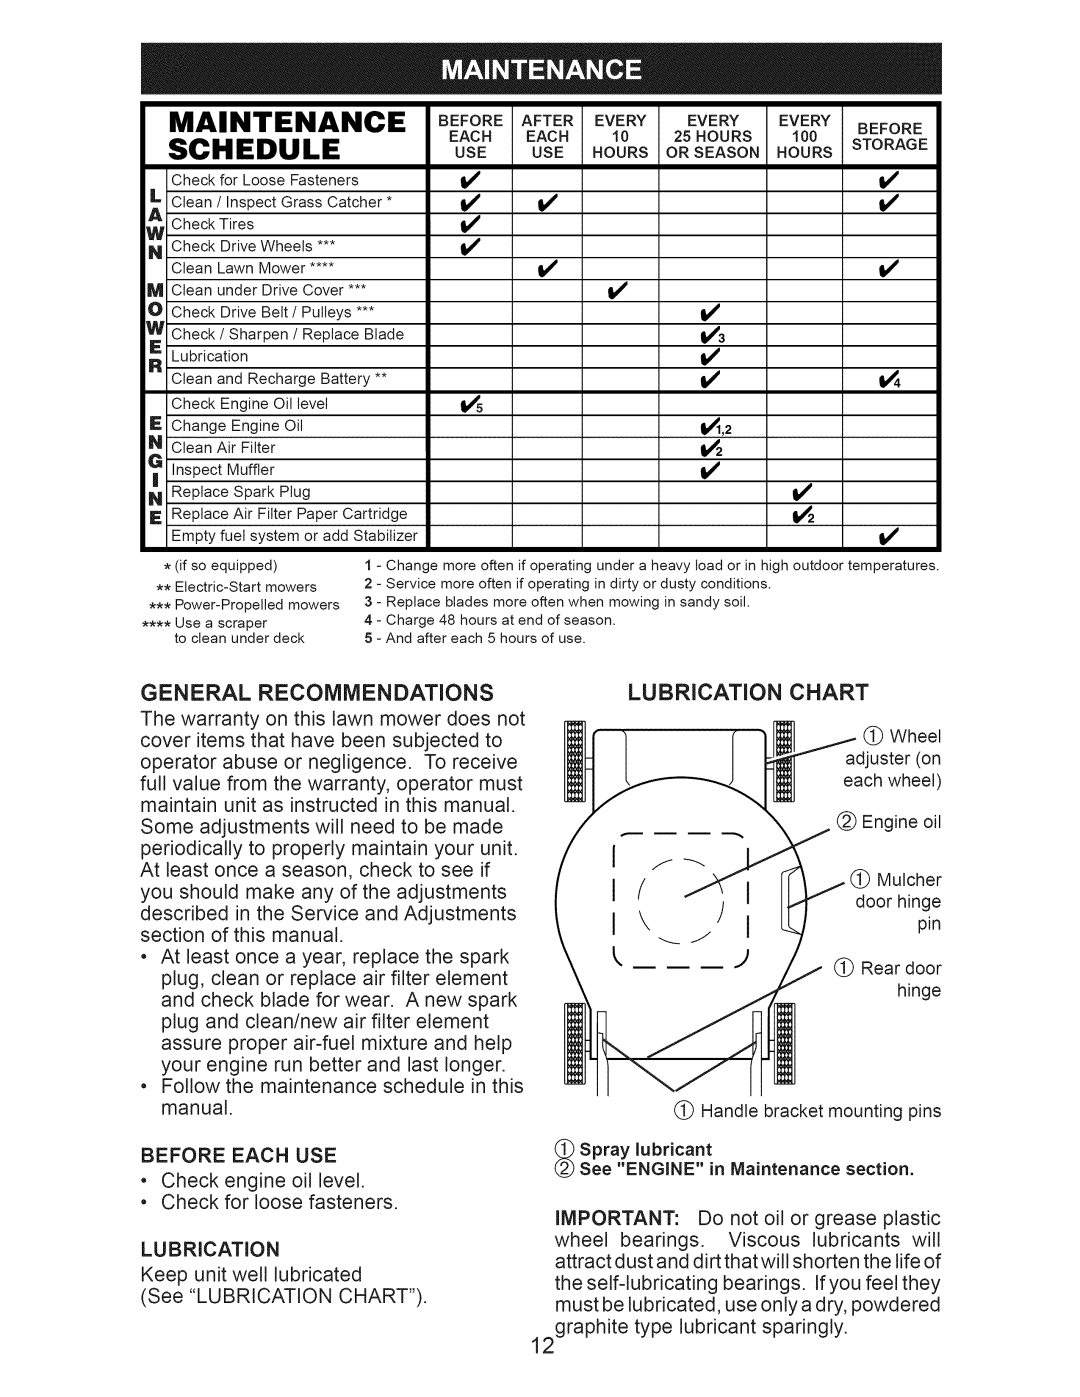 Craftsman 917.374352 owner manual General Recommendations, Before Each USE, Lubrication, Before After Every 